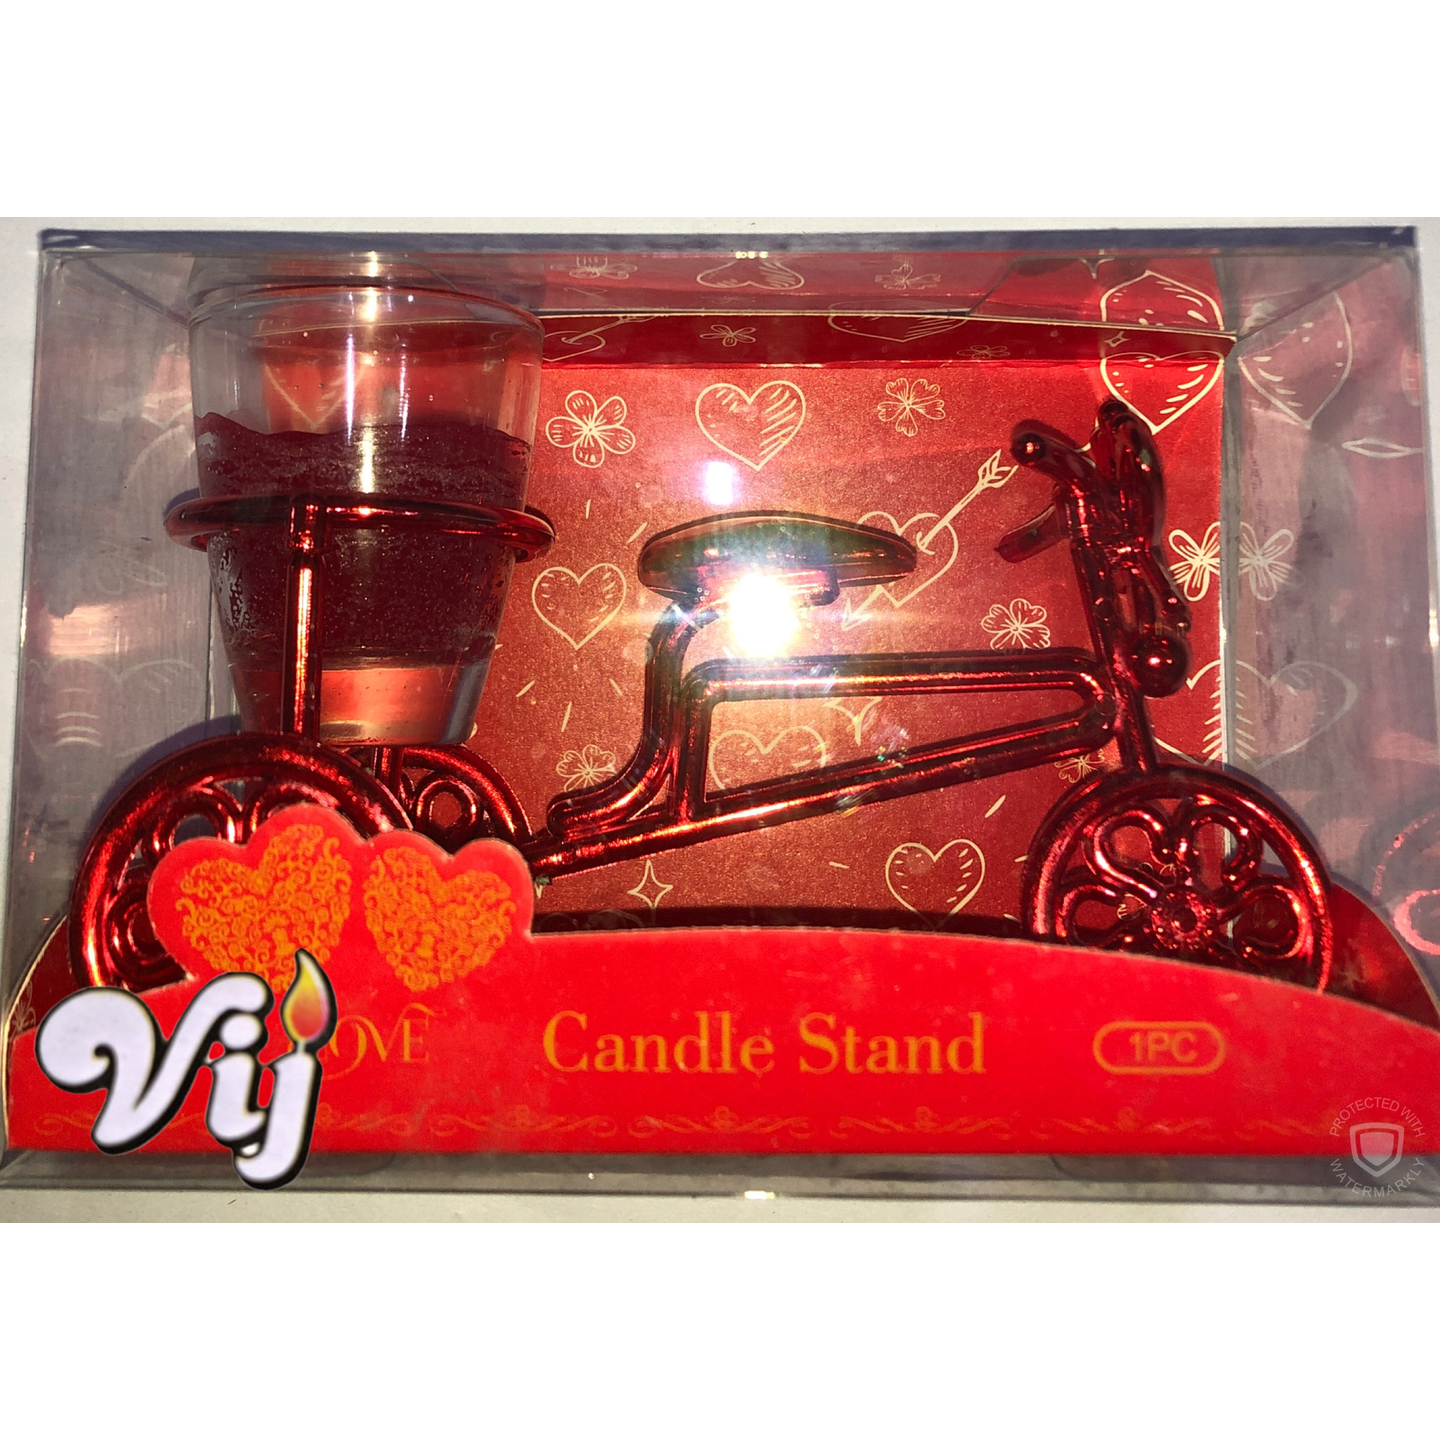 BYCYCLE CANDLE STAND